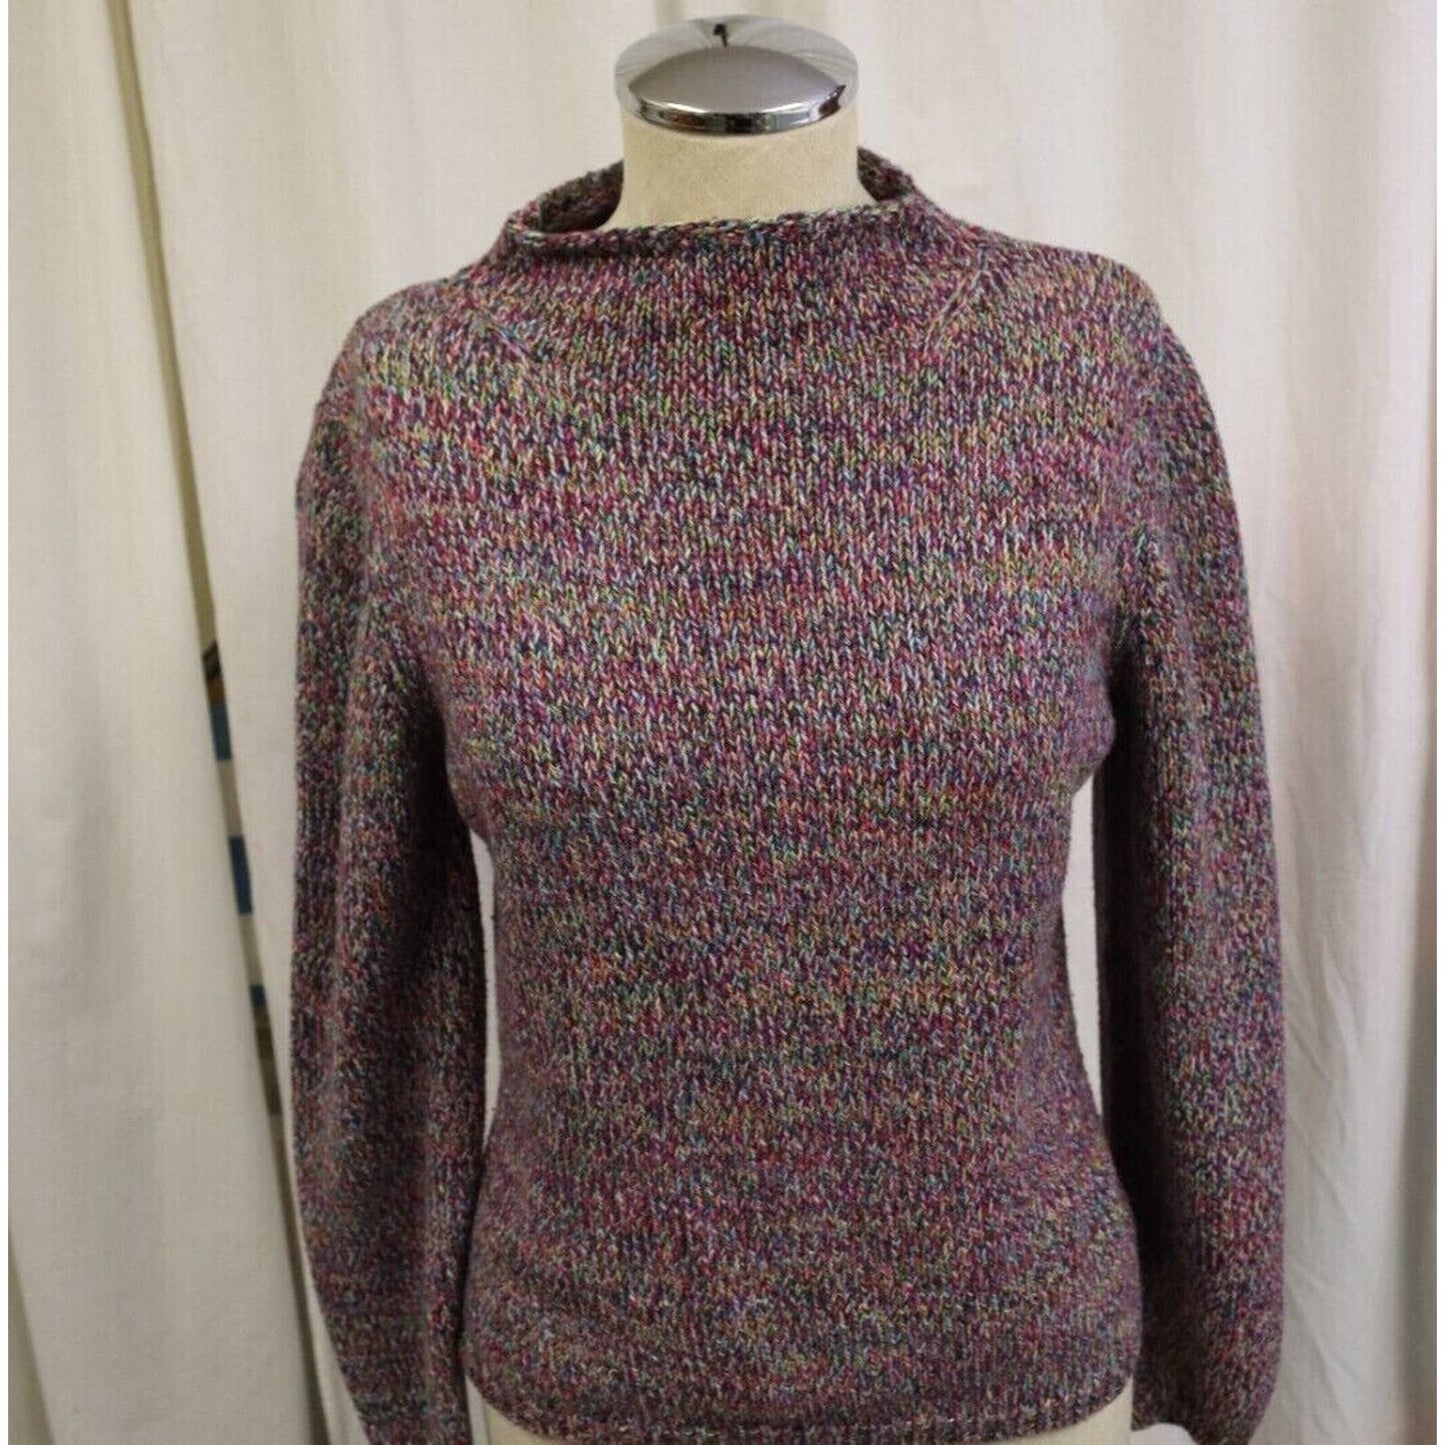 Vintage Knit Liz Claiborne Sweater with a Mock Neck and Long Sleeves